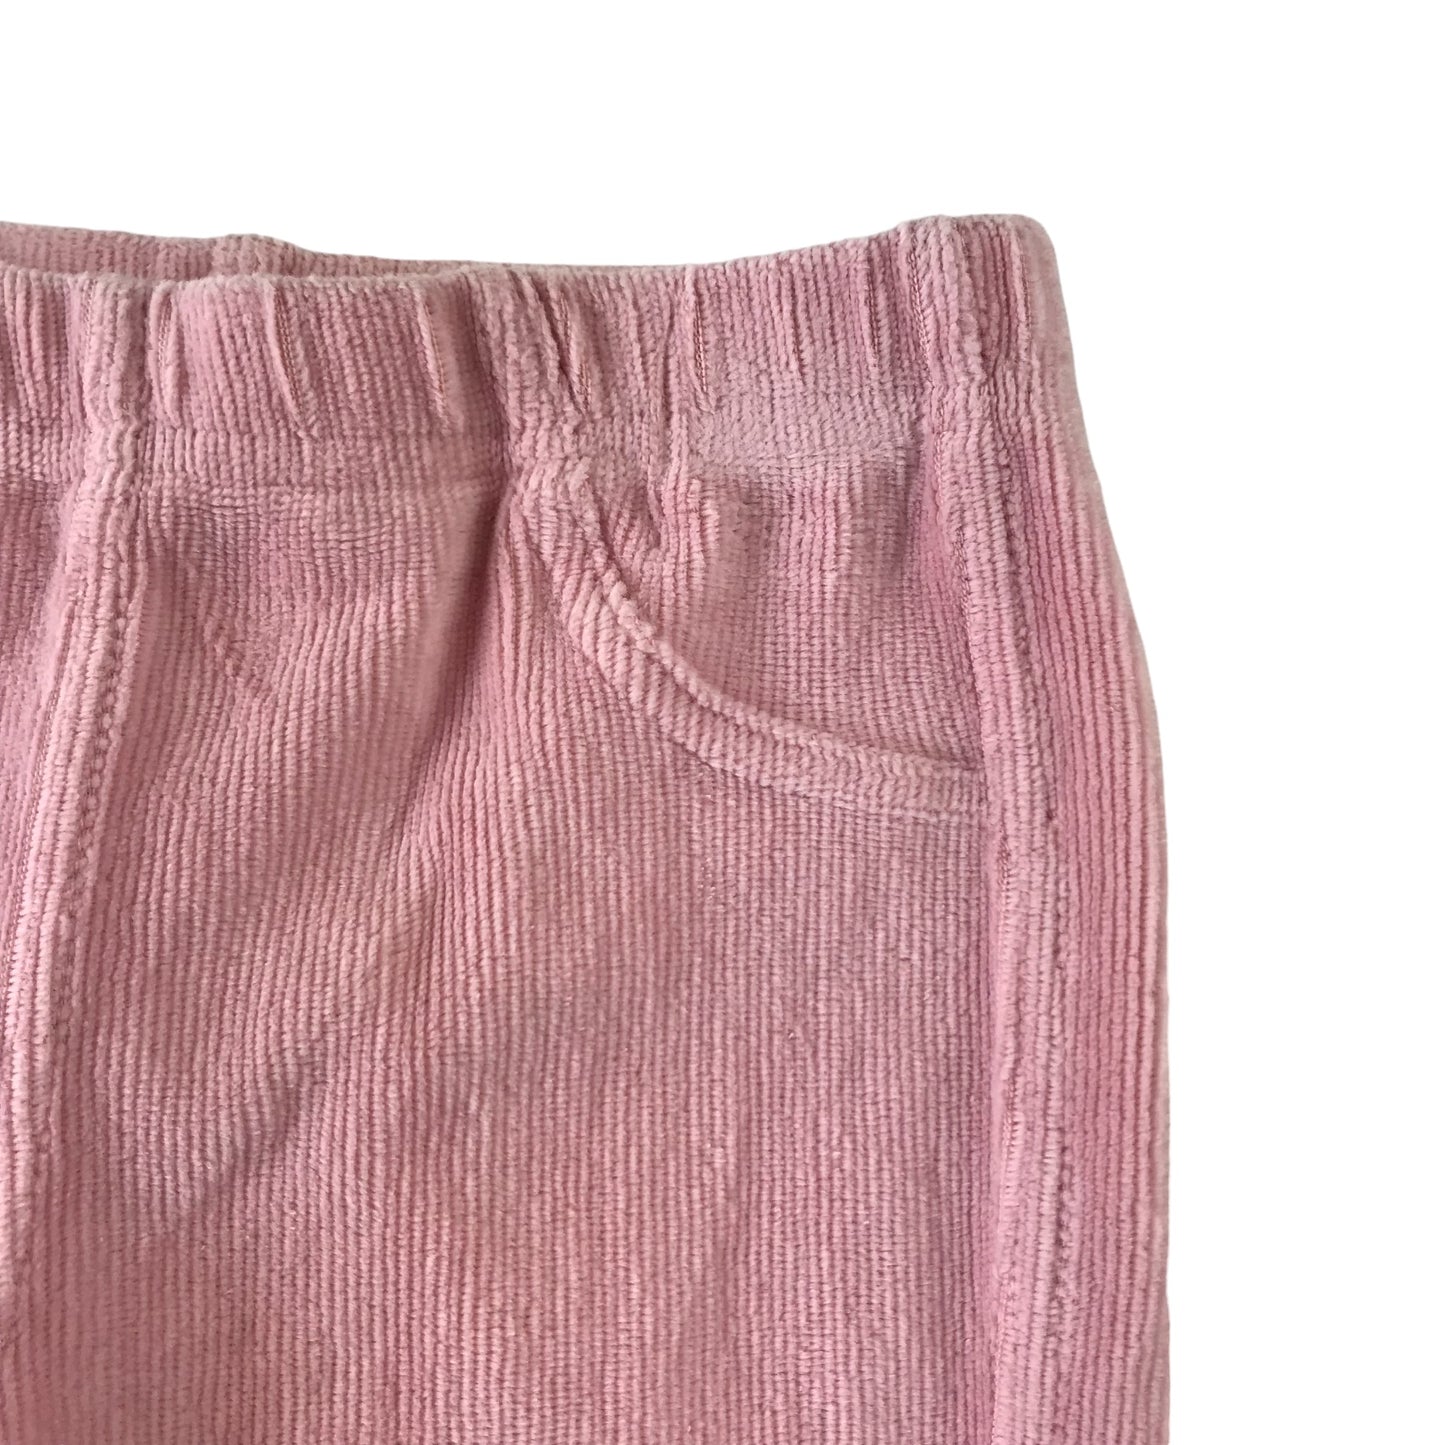 M&S and Nutmeg Leggings Bundle Age 5 Pink and Mauve Taupe Corduroy Jeggings